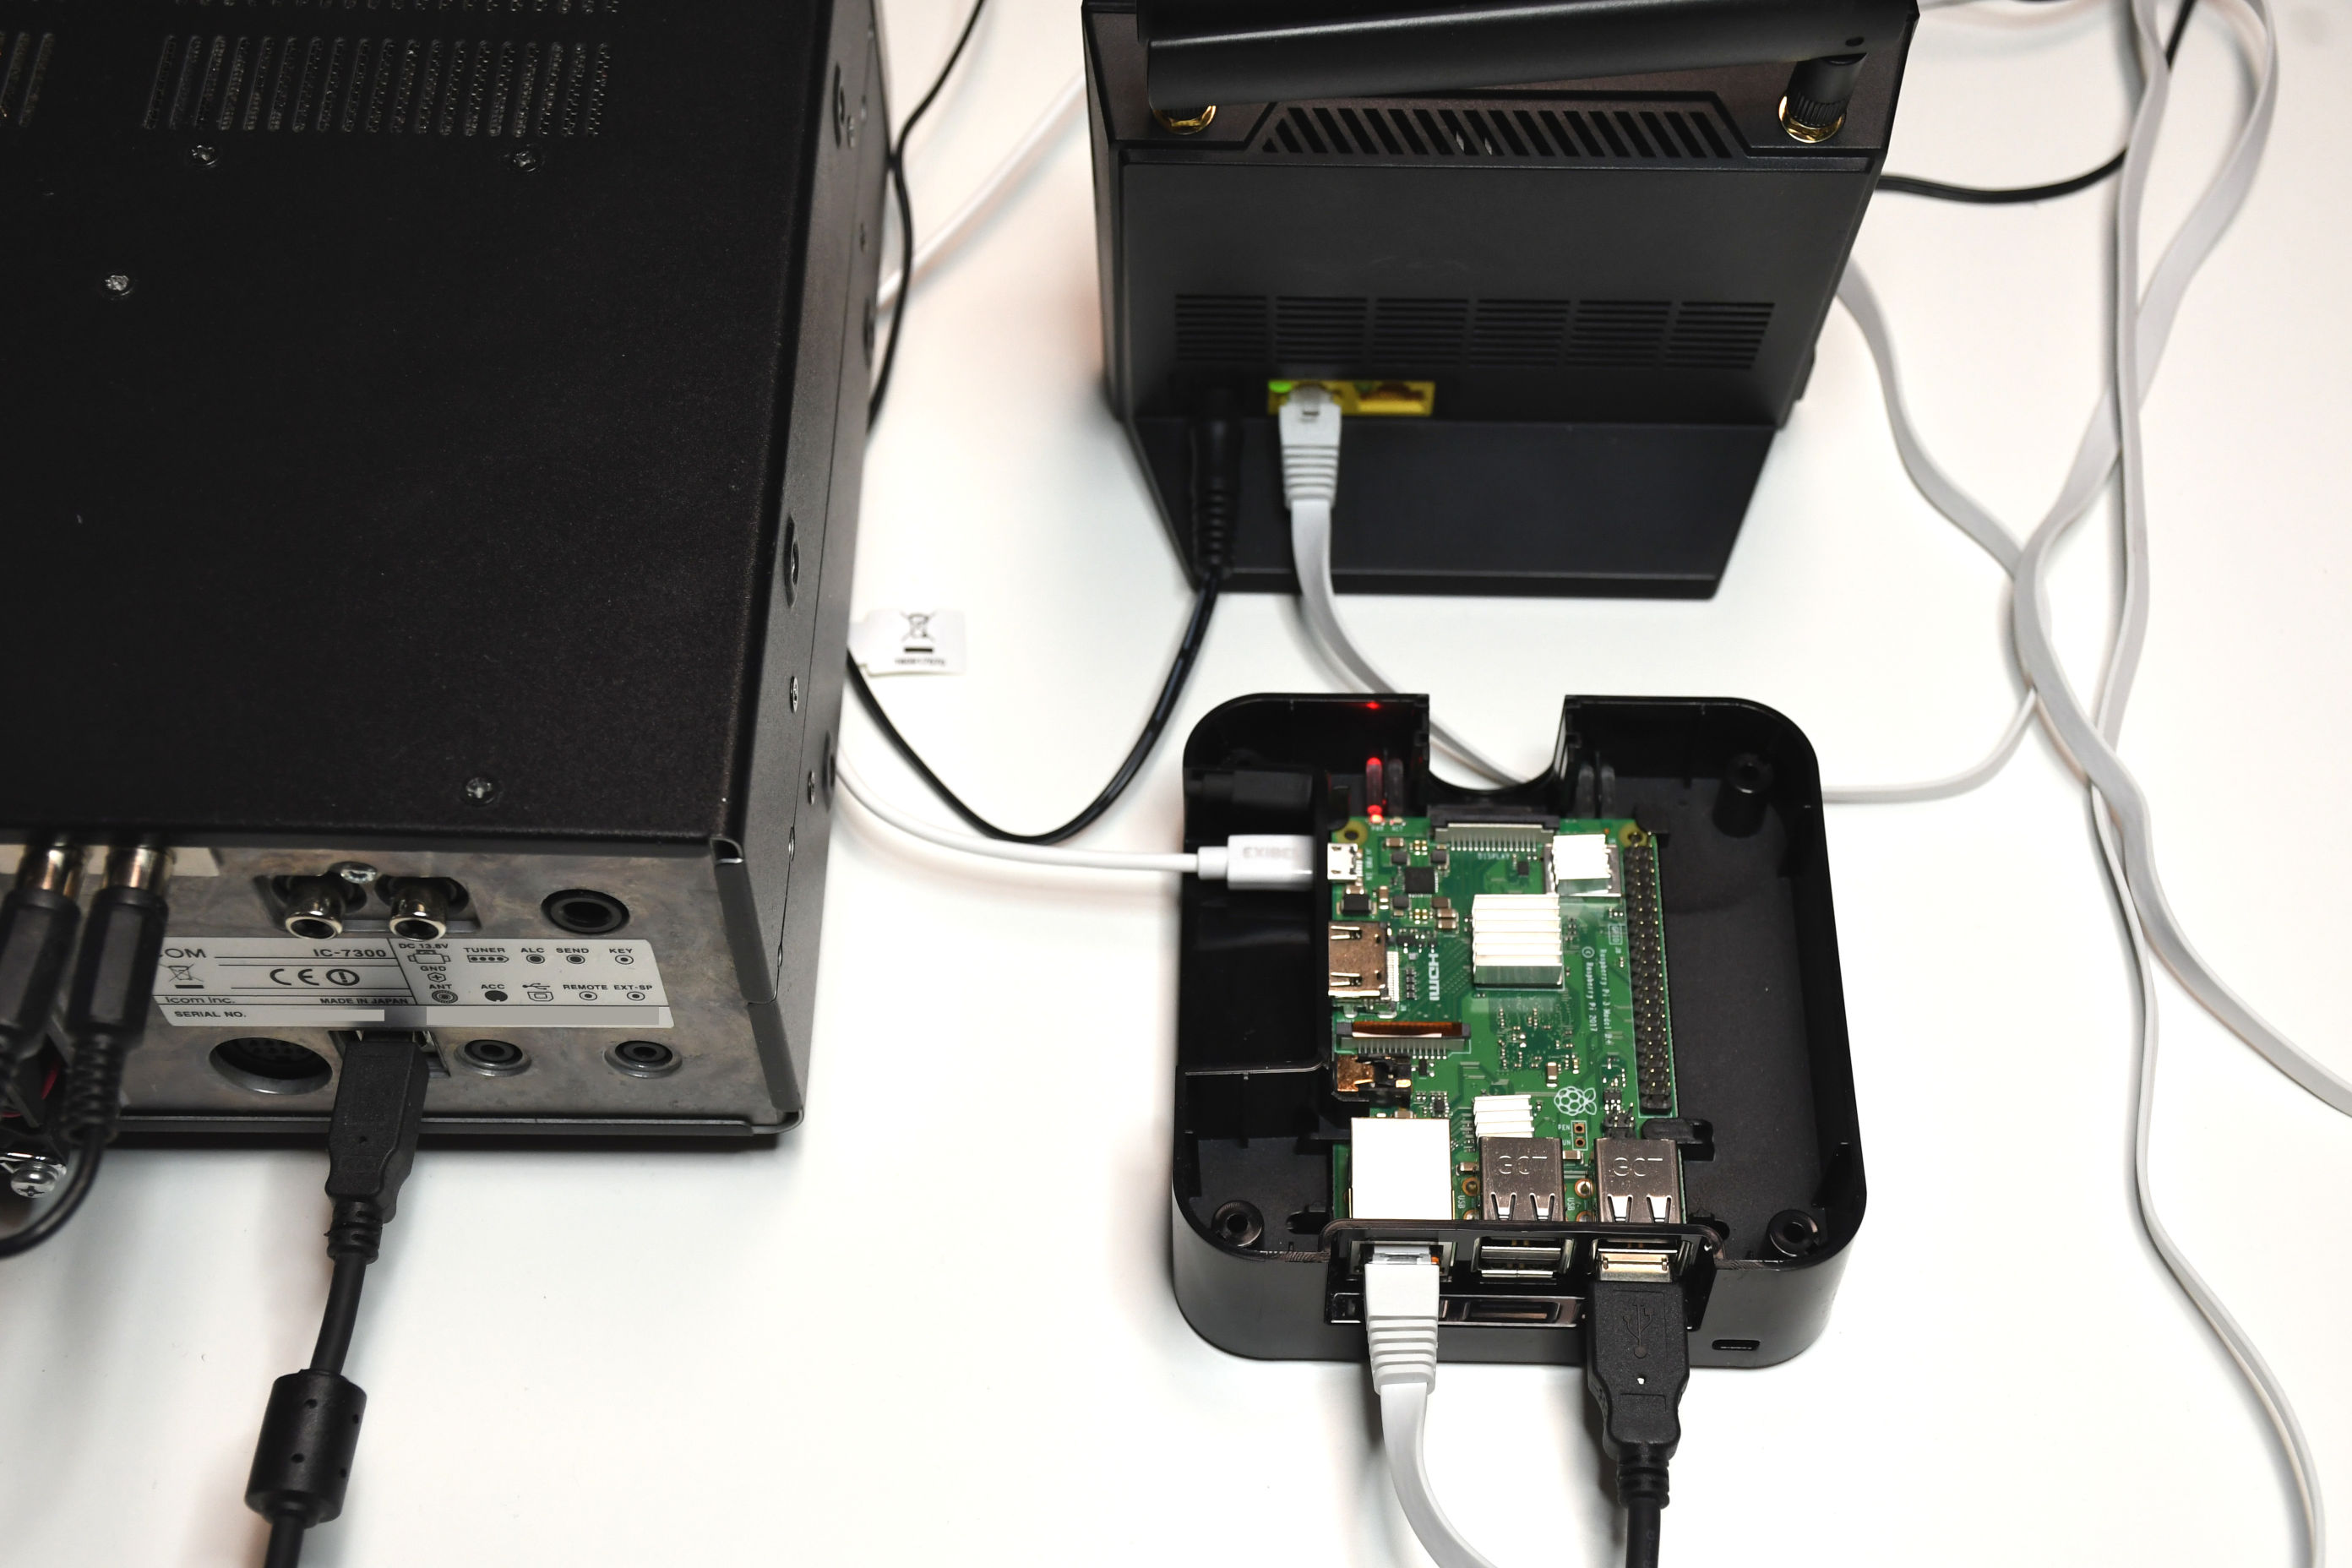 An example photo of Raspberry Pi connected both to an Icom IC-7300 radio via a USB cable and to a 4G modem for Internet connectivity